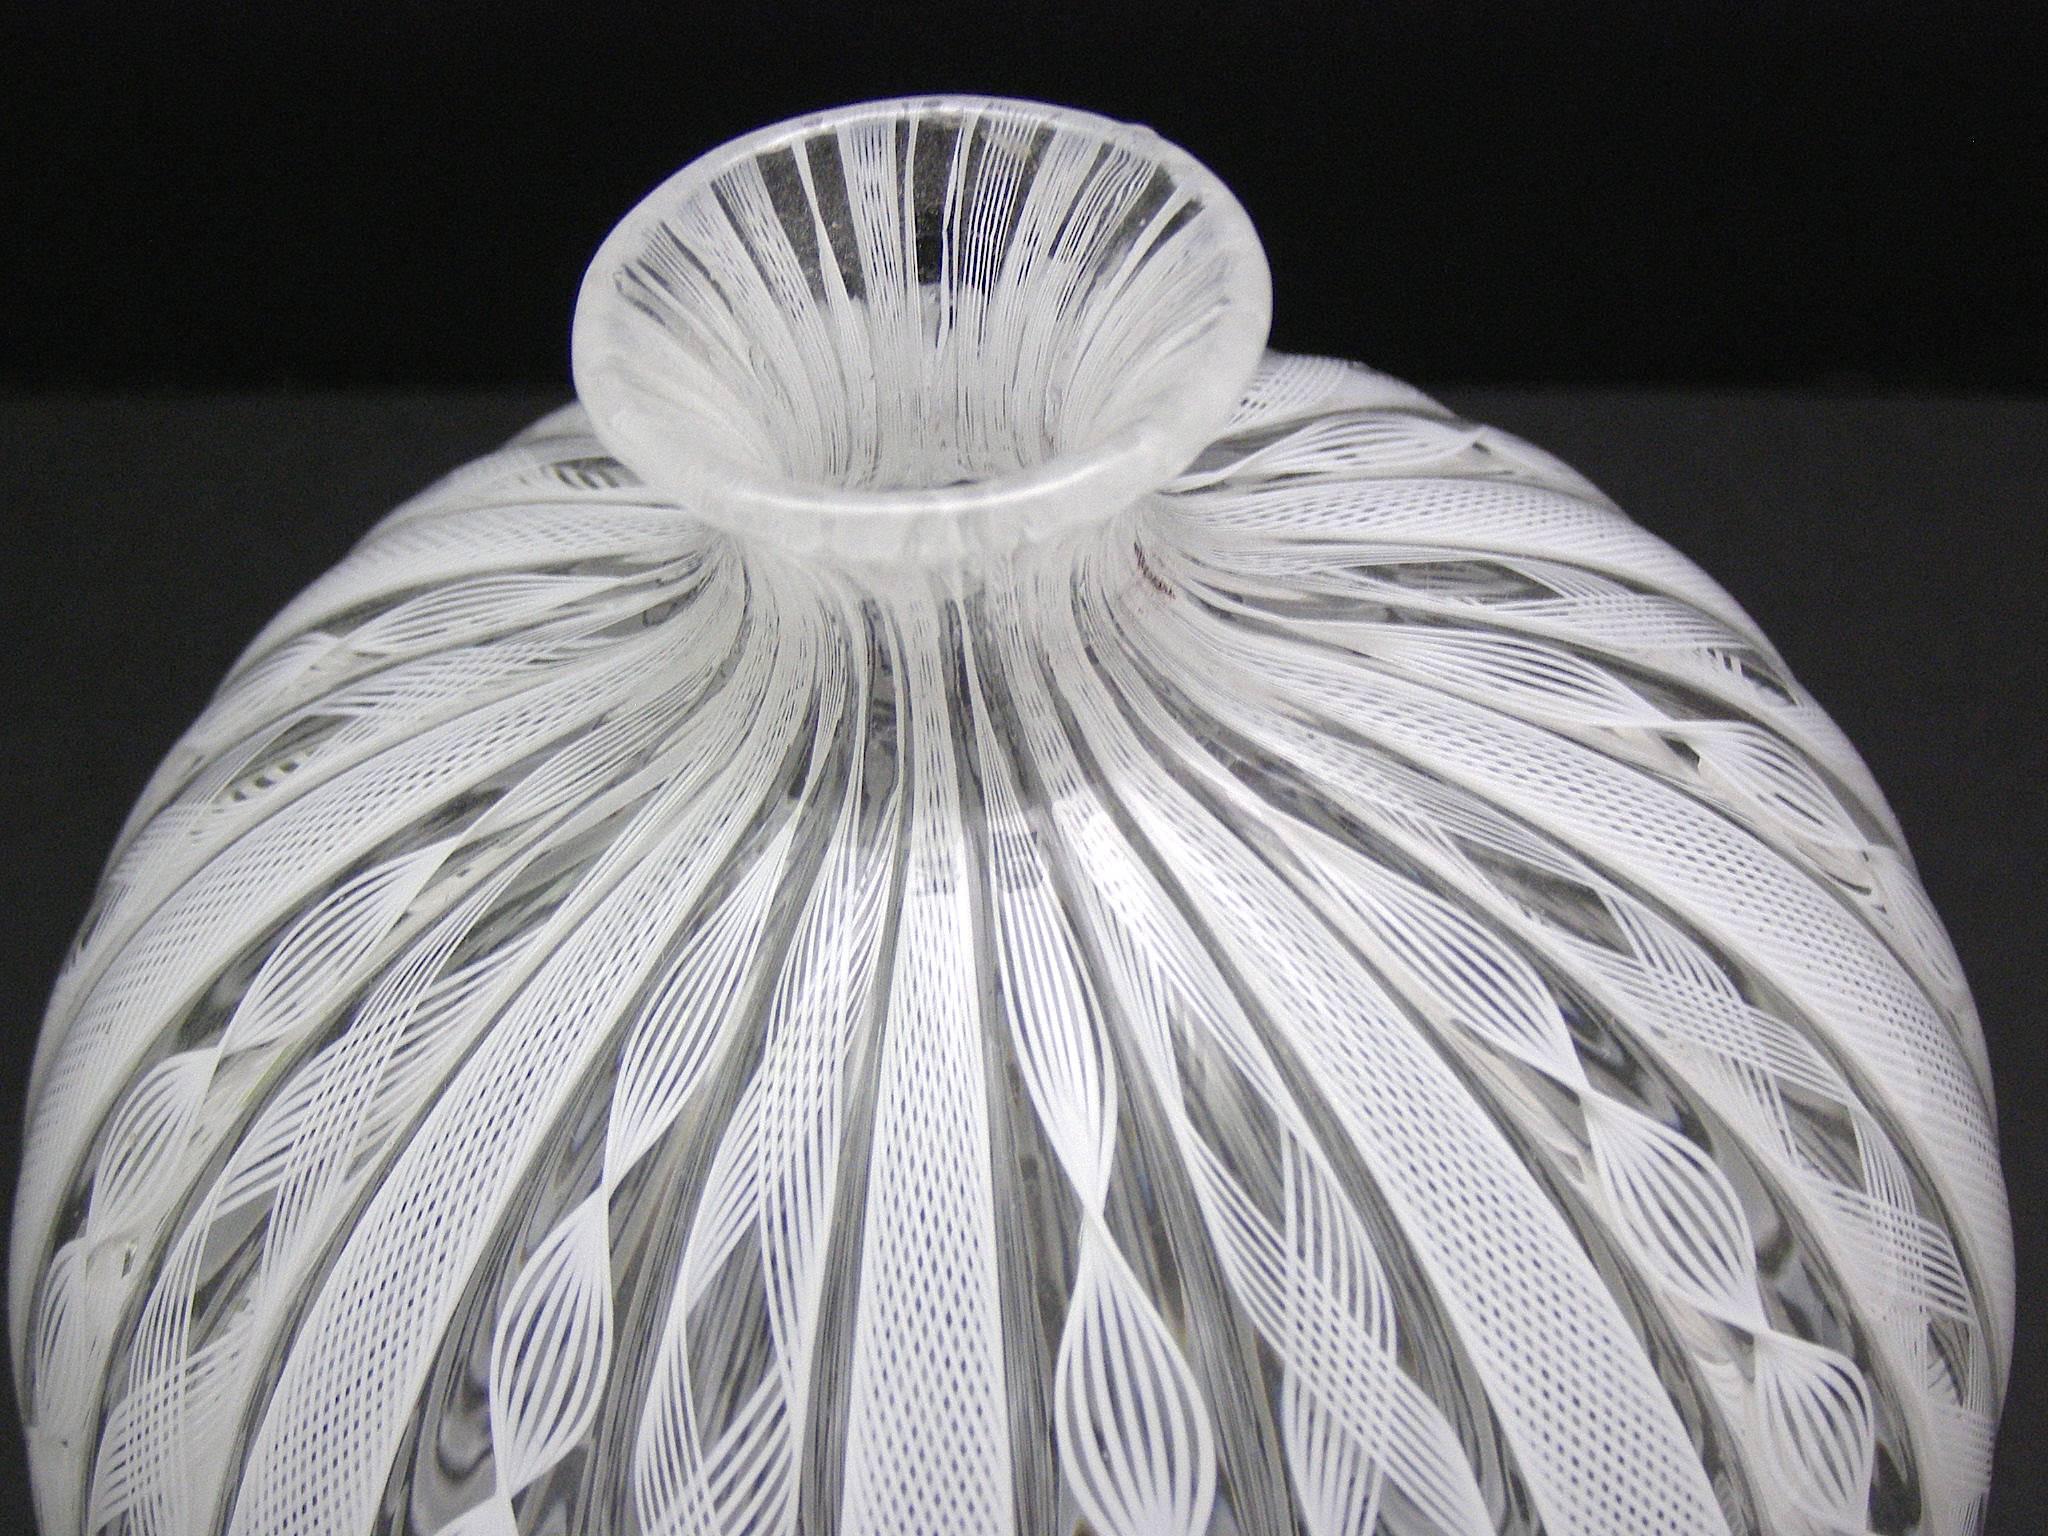 Beautiful handblown Murano glass vase/vessel with gorgeous intricate caned lattimo and latticino work in white. Finley blown and wonderful to the touch. Great alone and also with a small bunch of flowers in it.